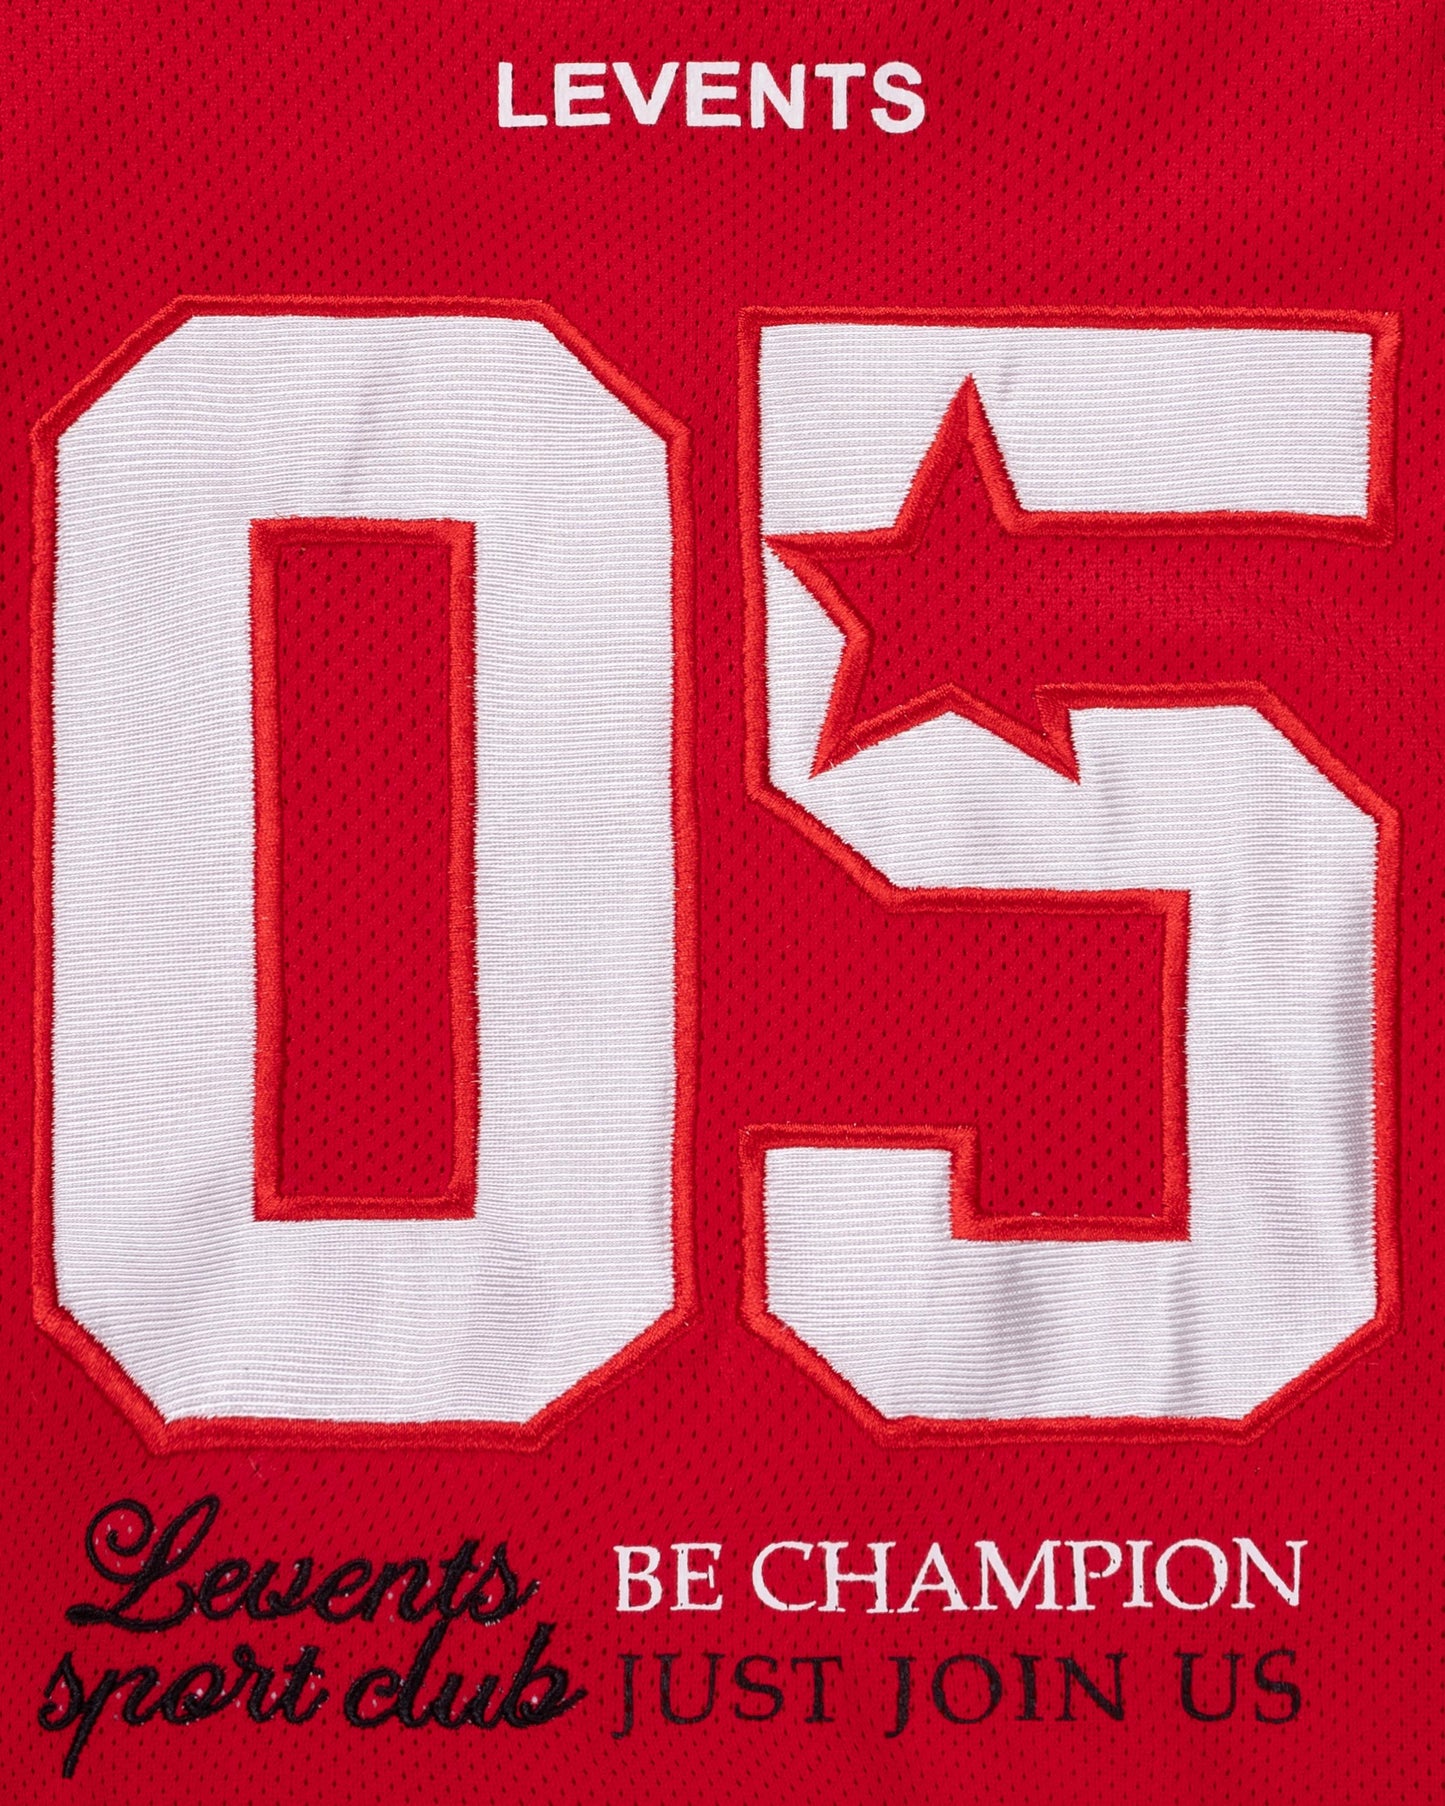 Levents® 05 Jersey/ Red